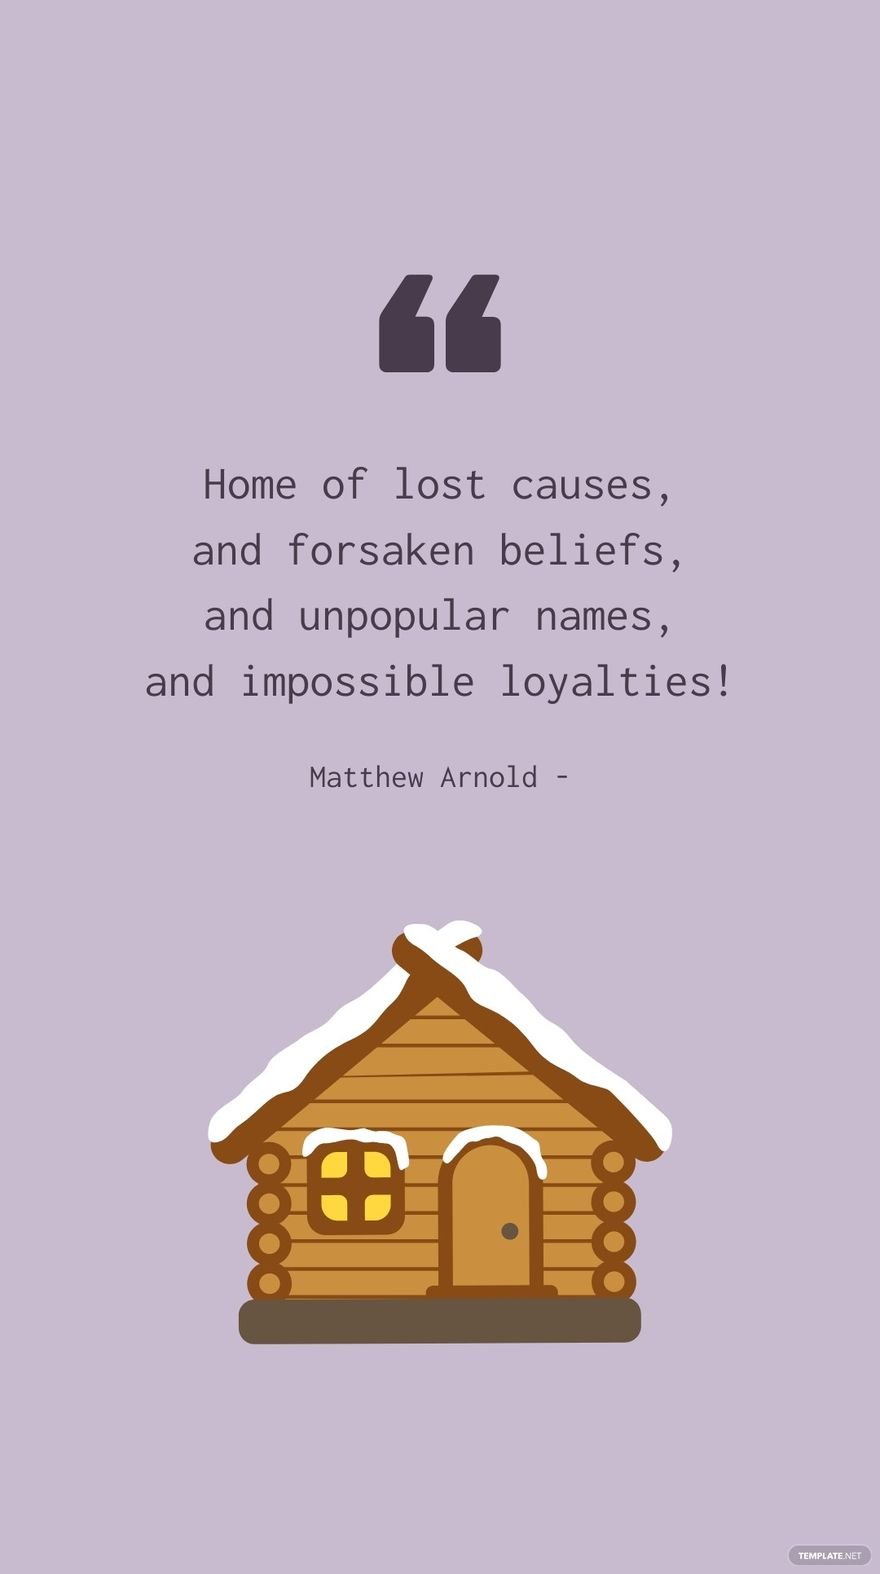 Matthew Arnold - Home of lost causes, and forsaken beliefs, and unpopular names, and impossible loyalties!